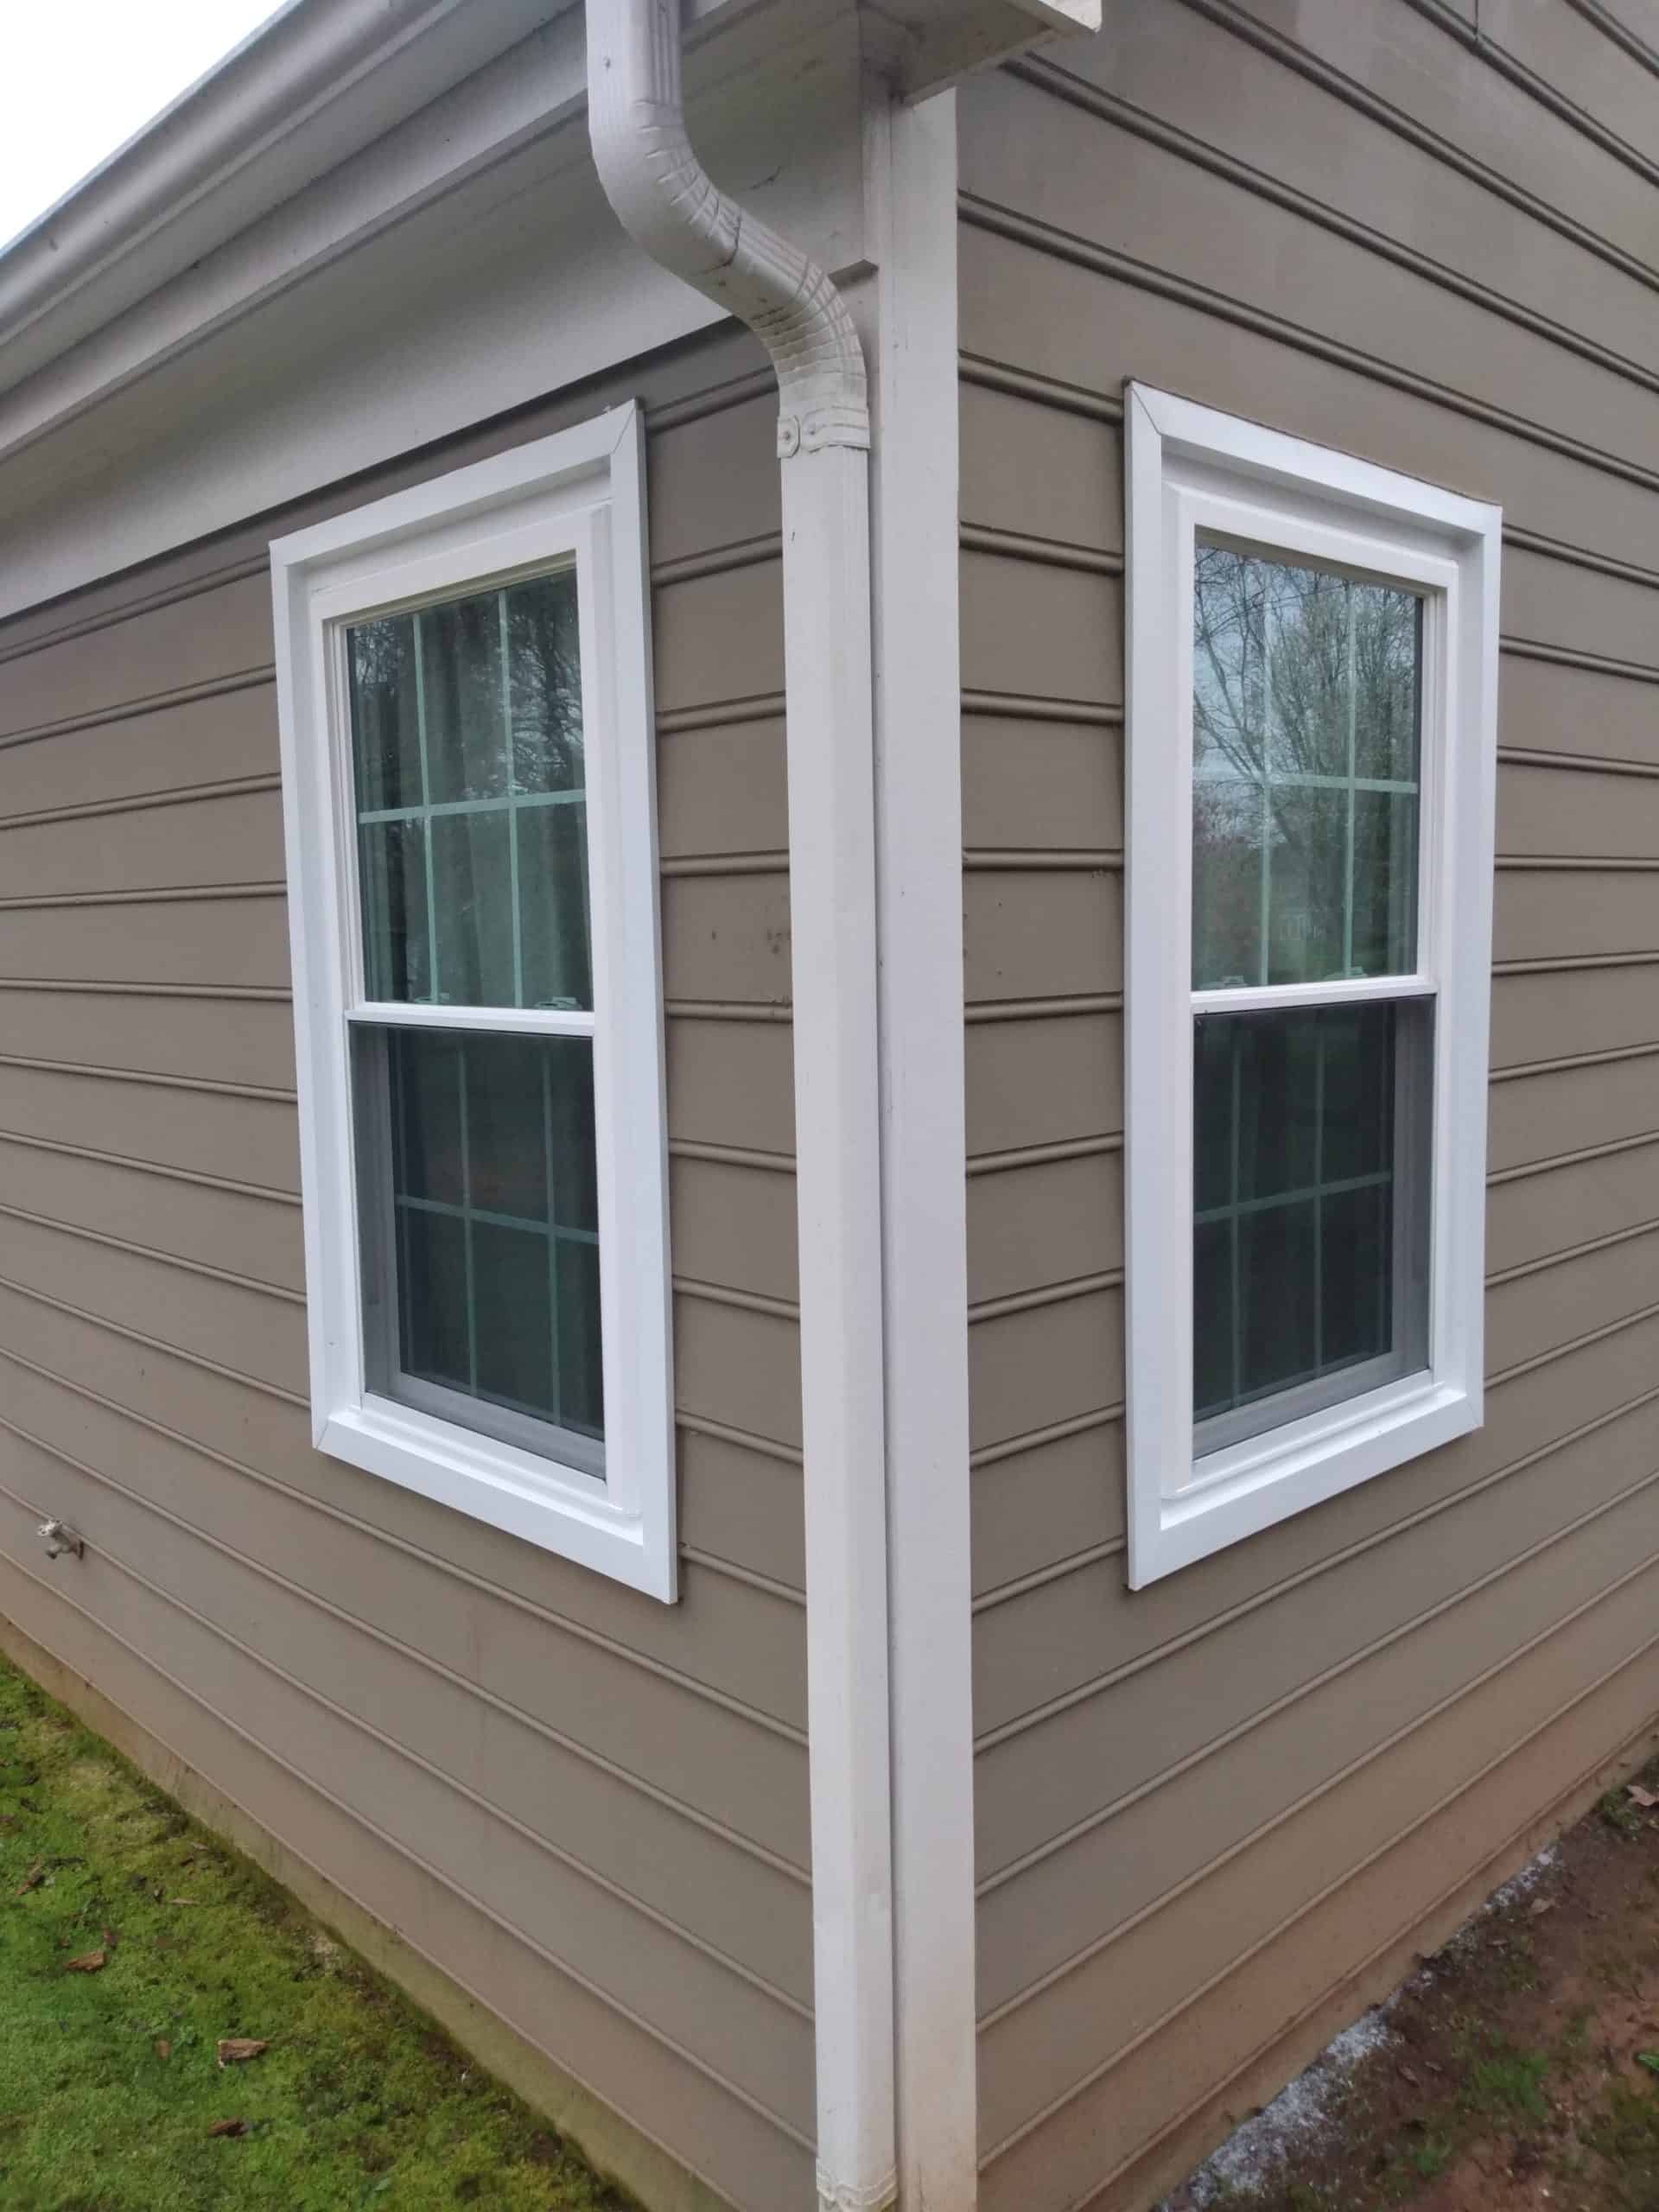 Exterior view of SoftLite windows installed in a home